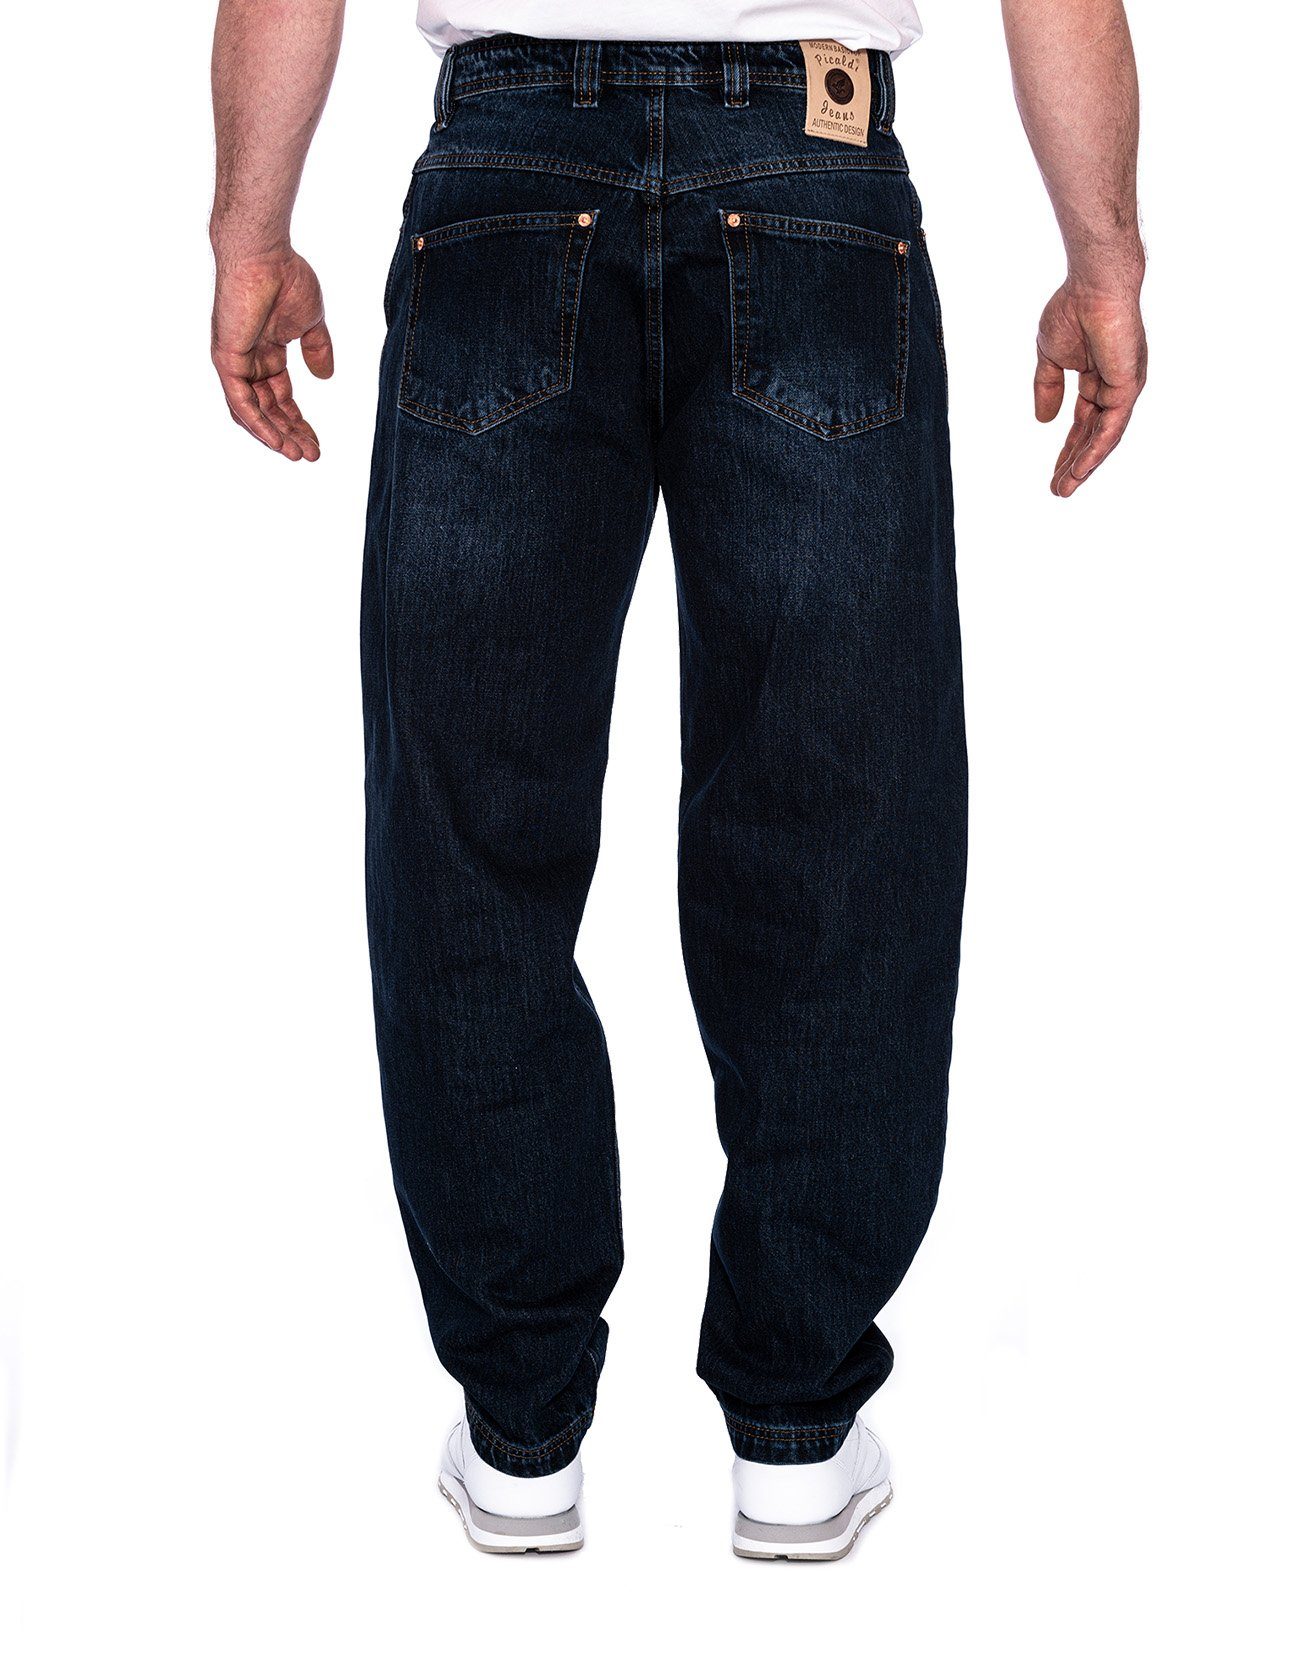 Jeans PICALDI Jeans Five Fit, Zicco Jeans Pocket Weite Loose Hurricane 471